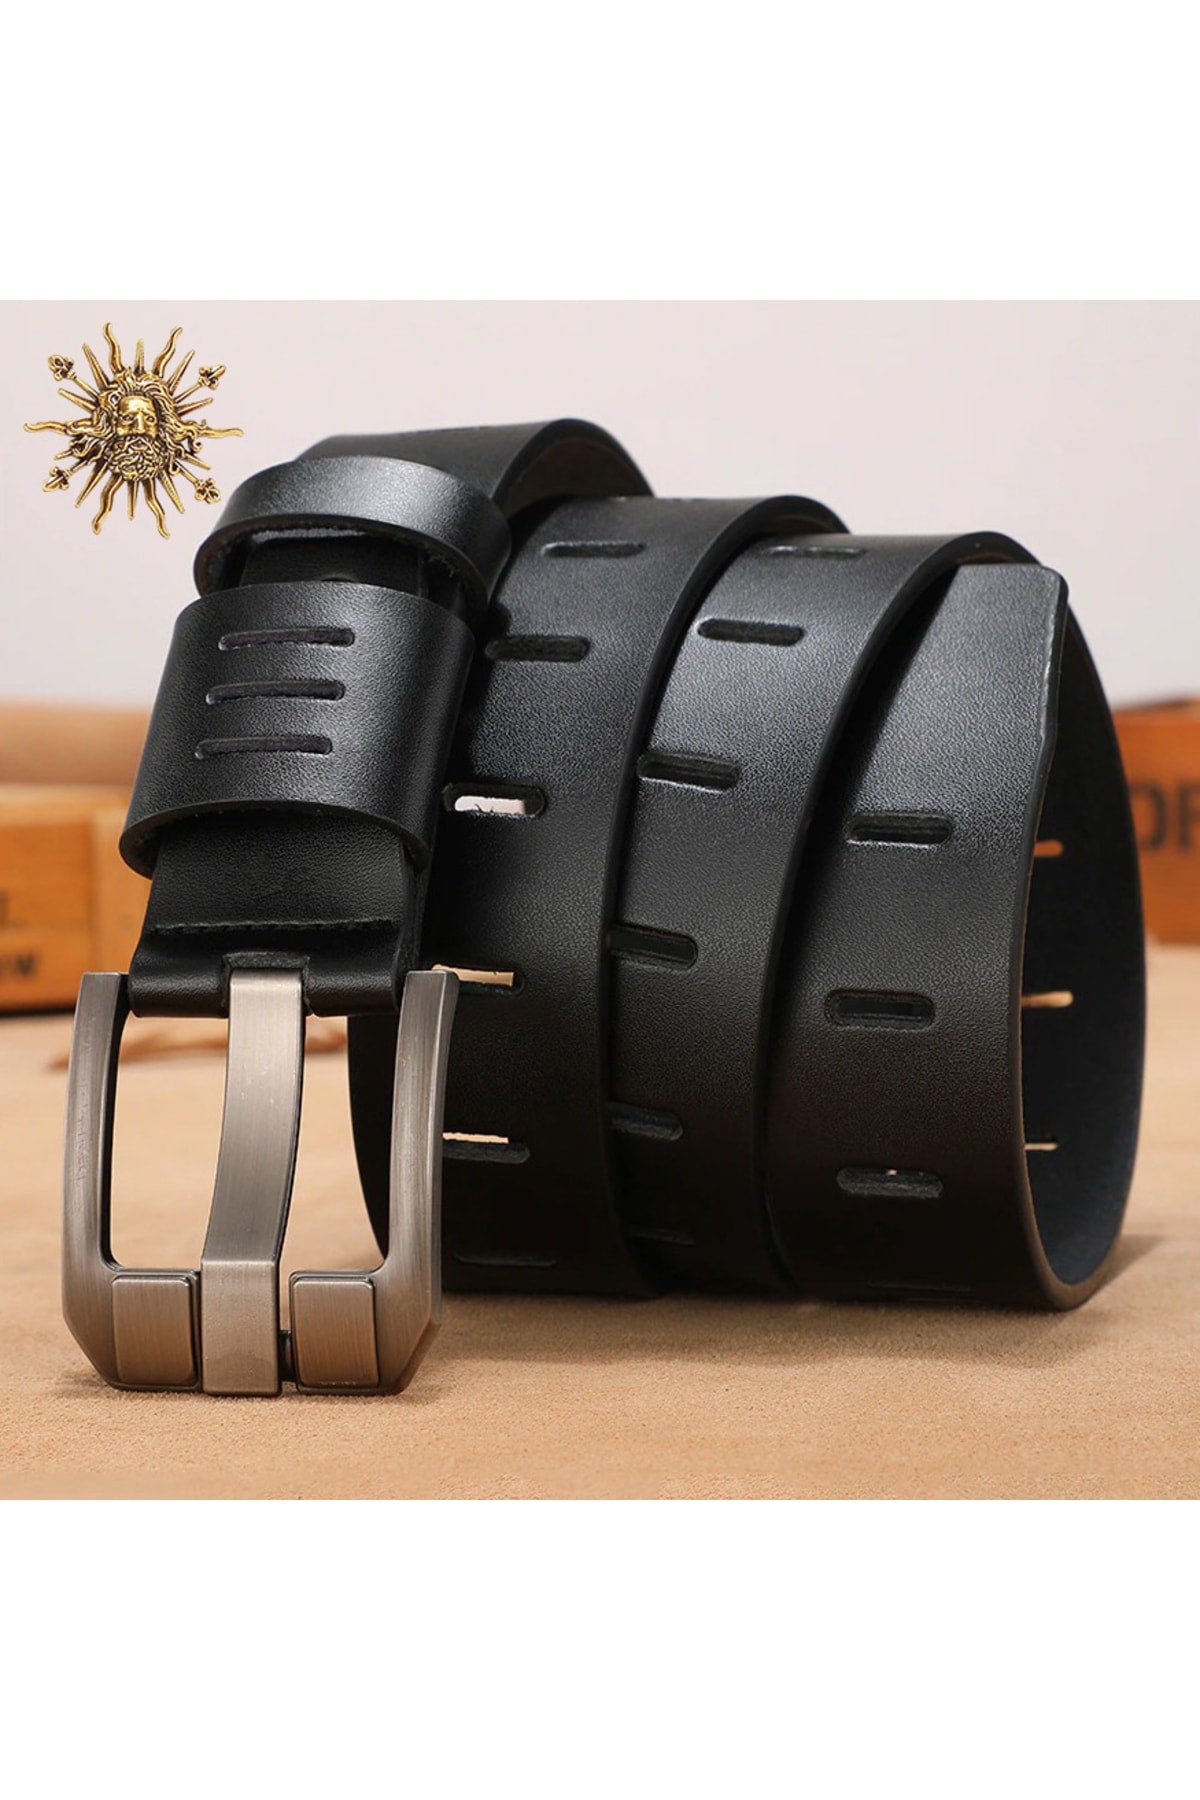 Supreme Made in Italy Lord Concept Genuine Leather Men's Belt